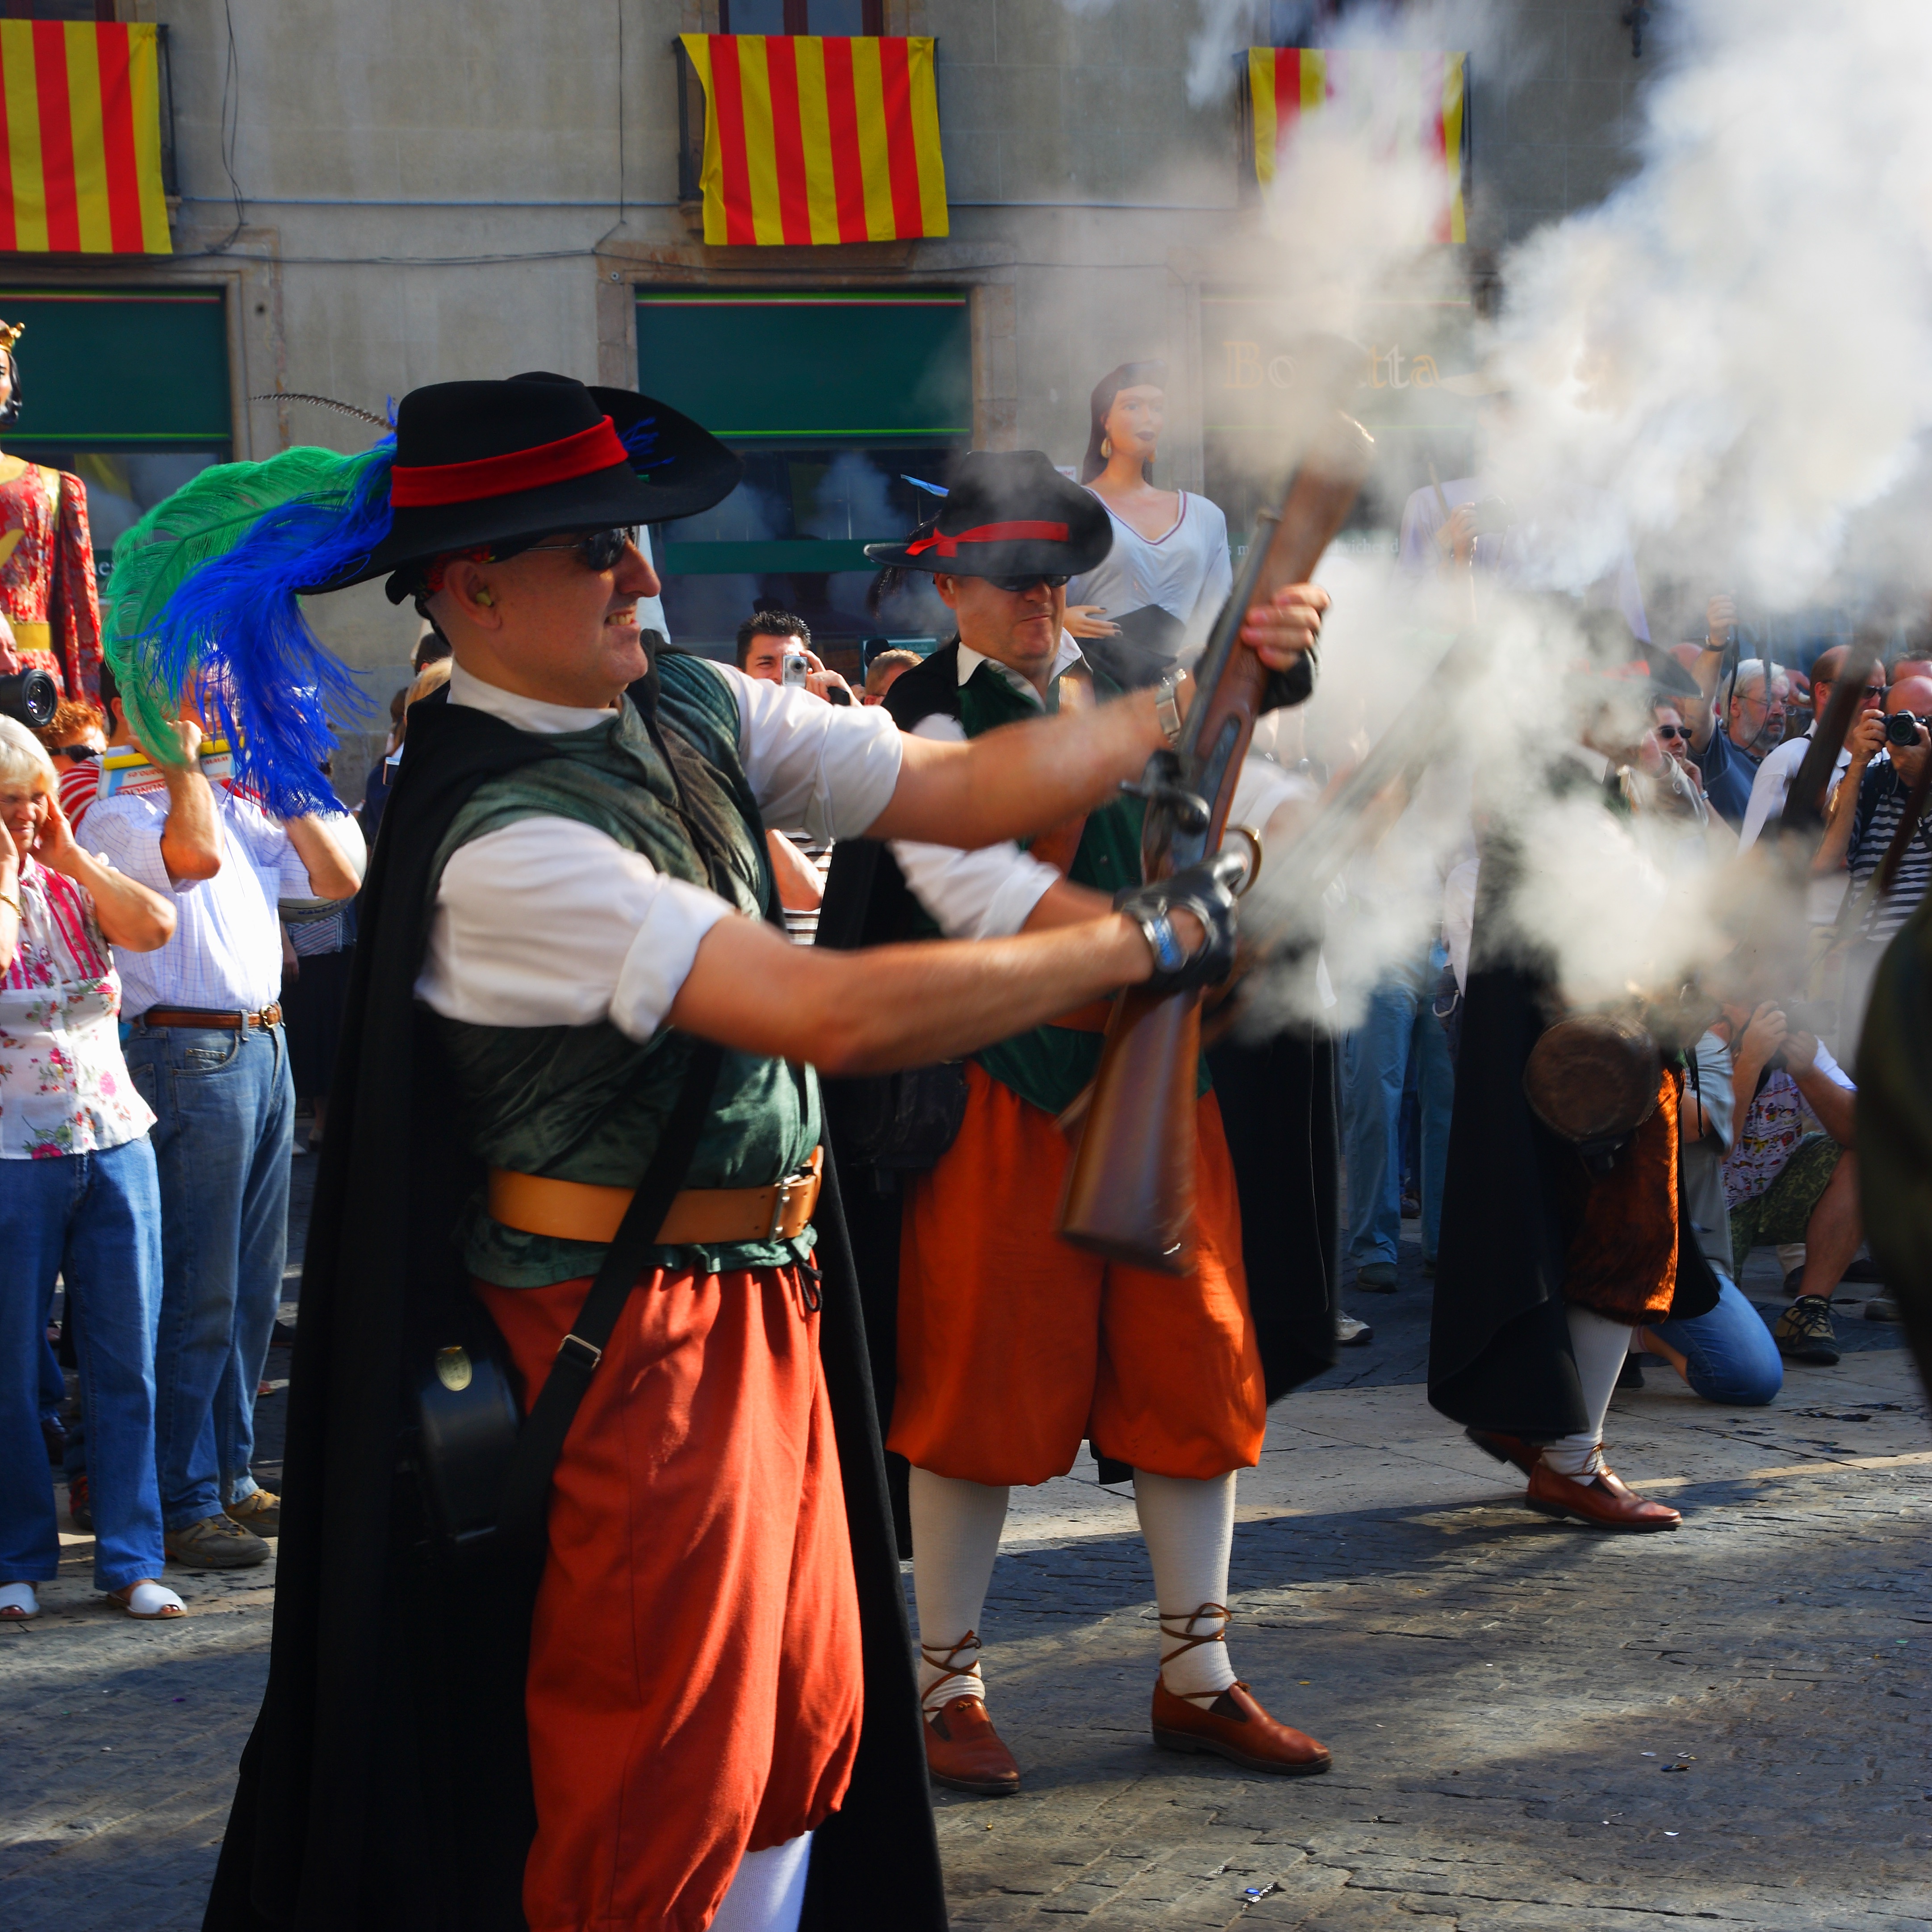 Men in traditional costume firing blunderbusses at a festival